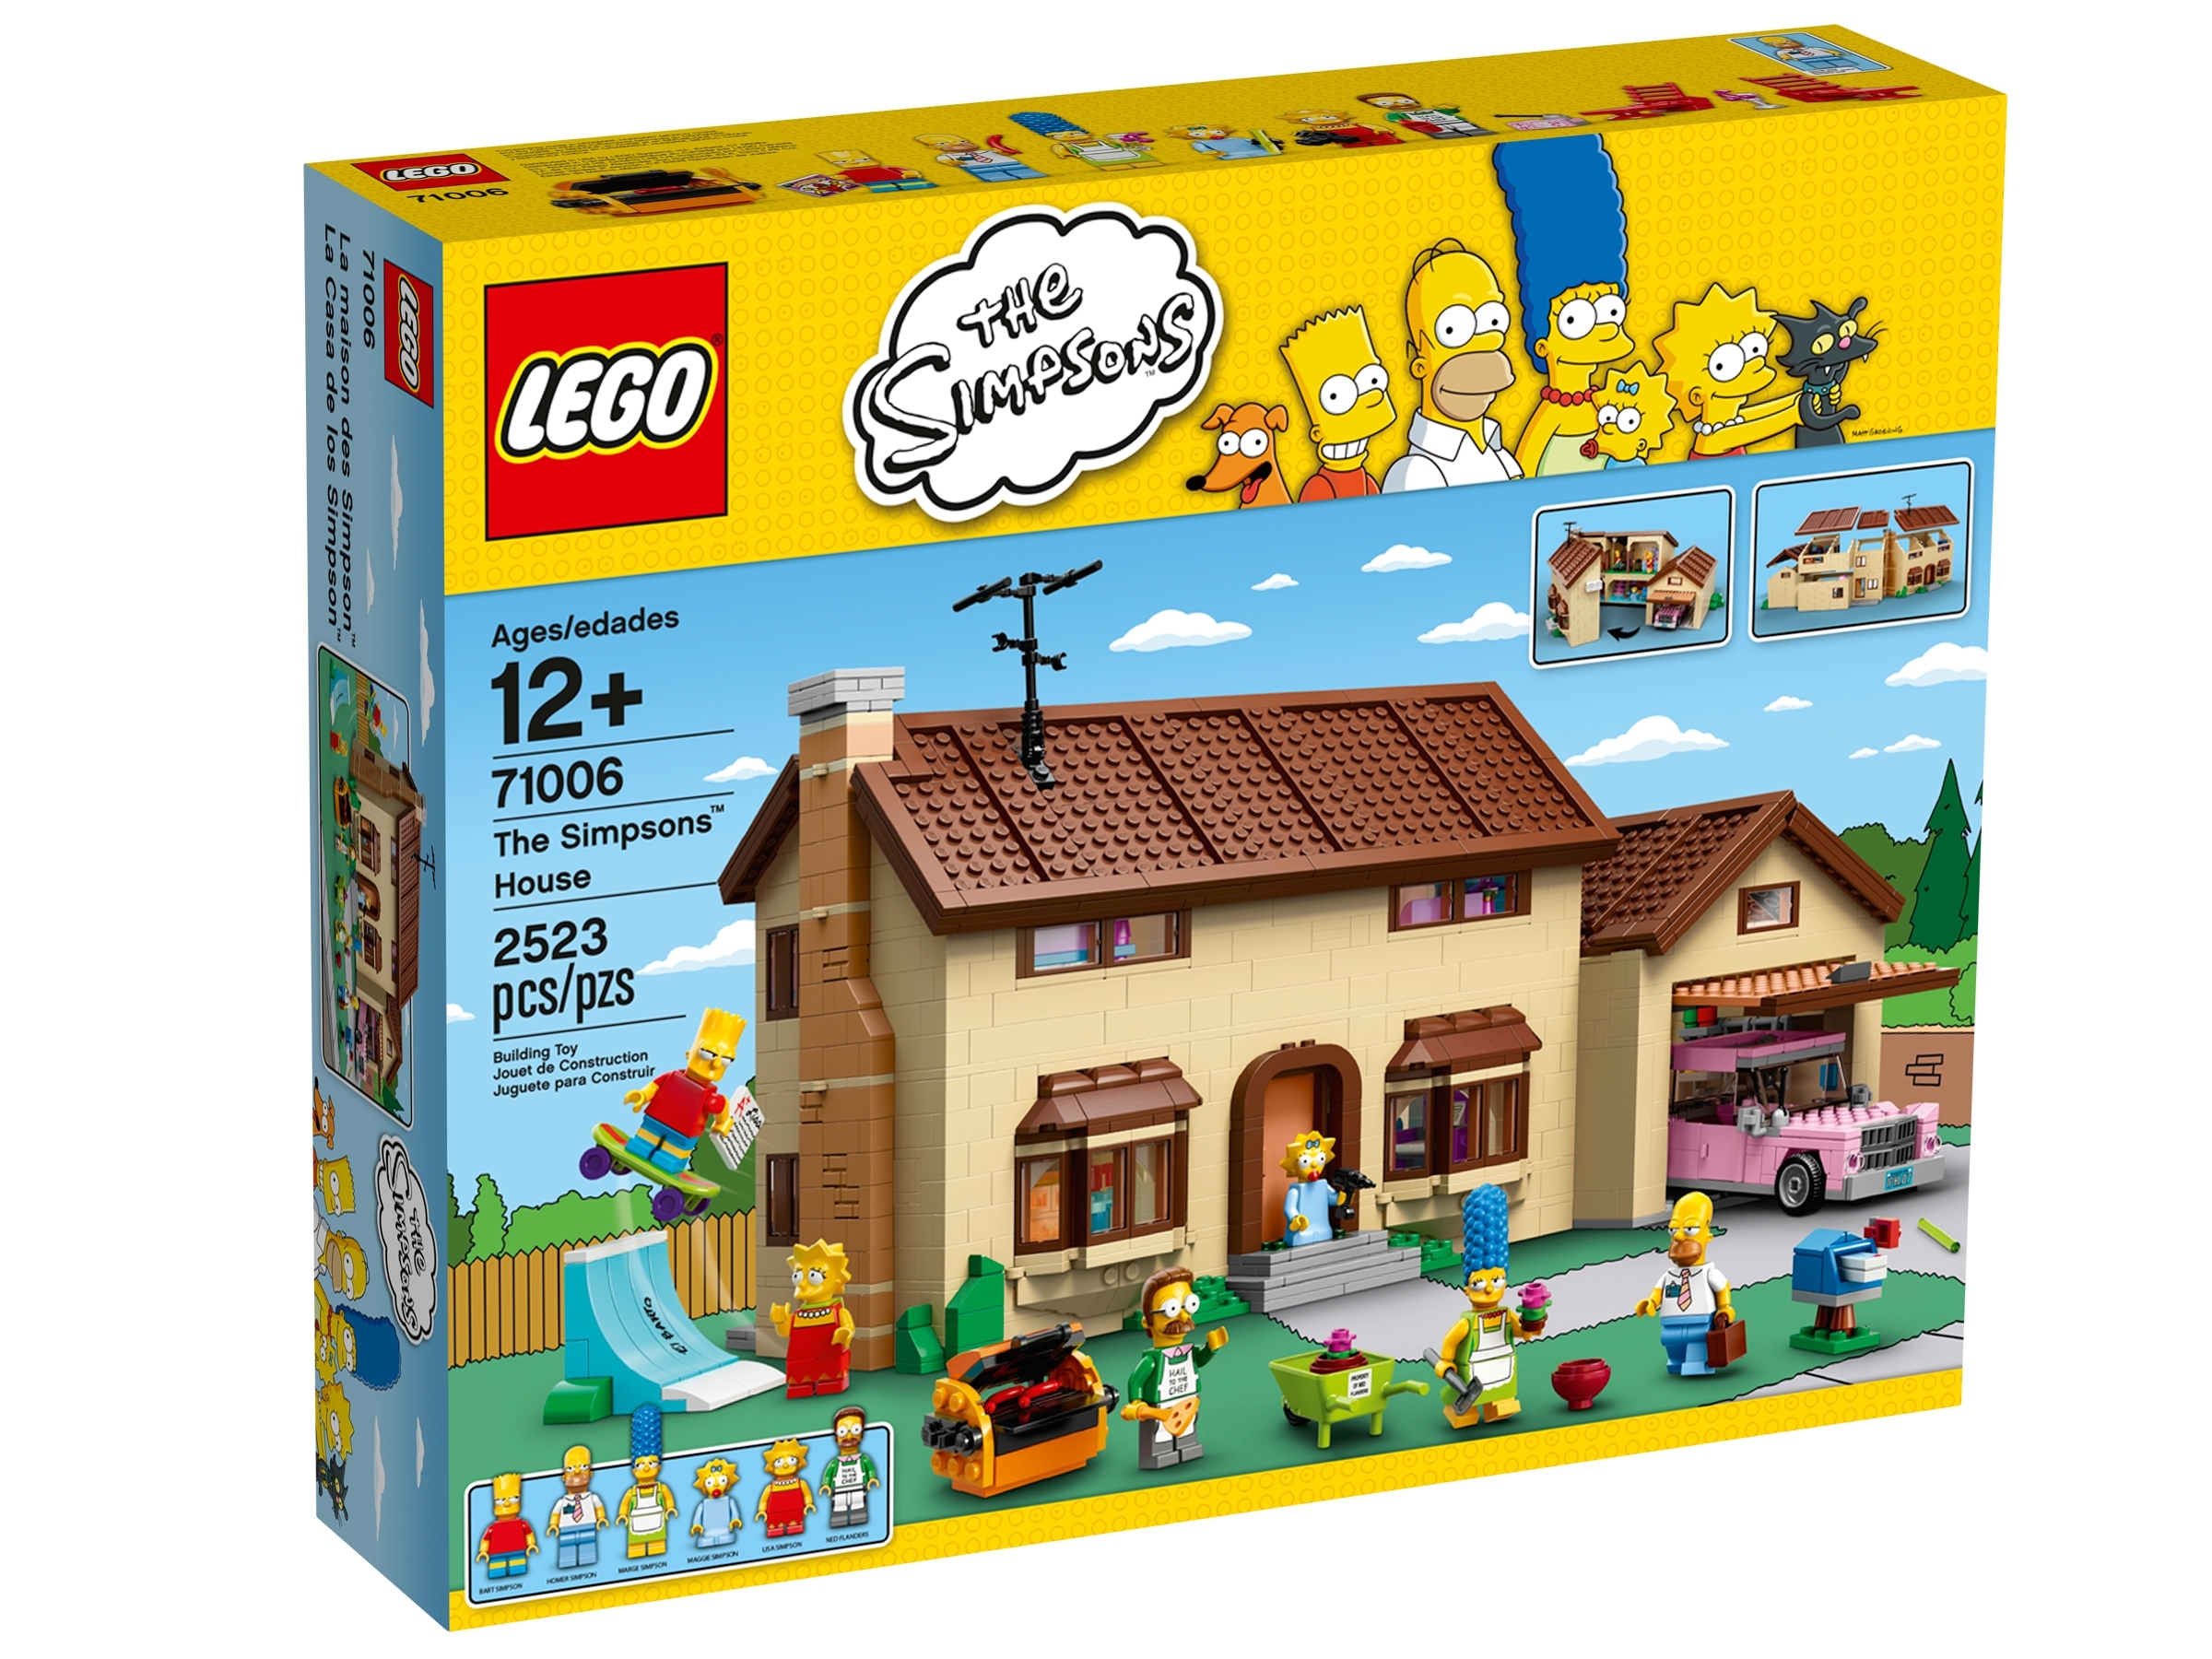 The Simpsons™ House 71006 | The 